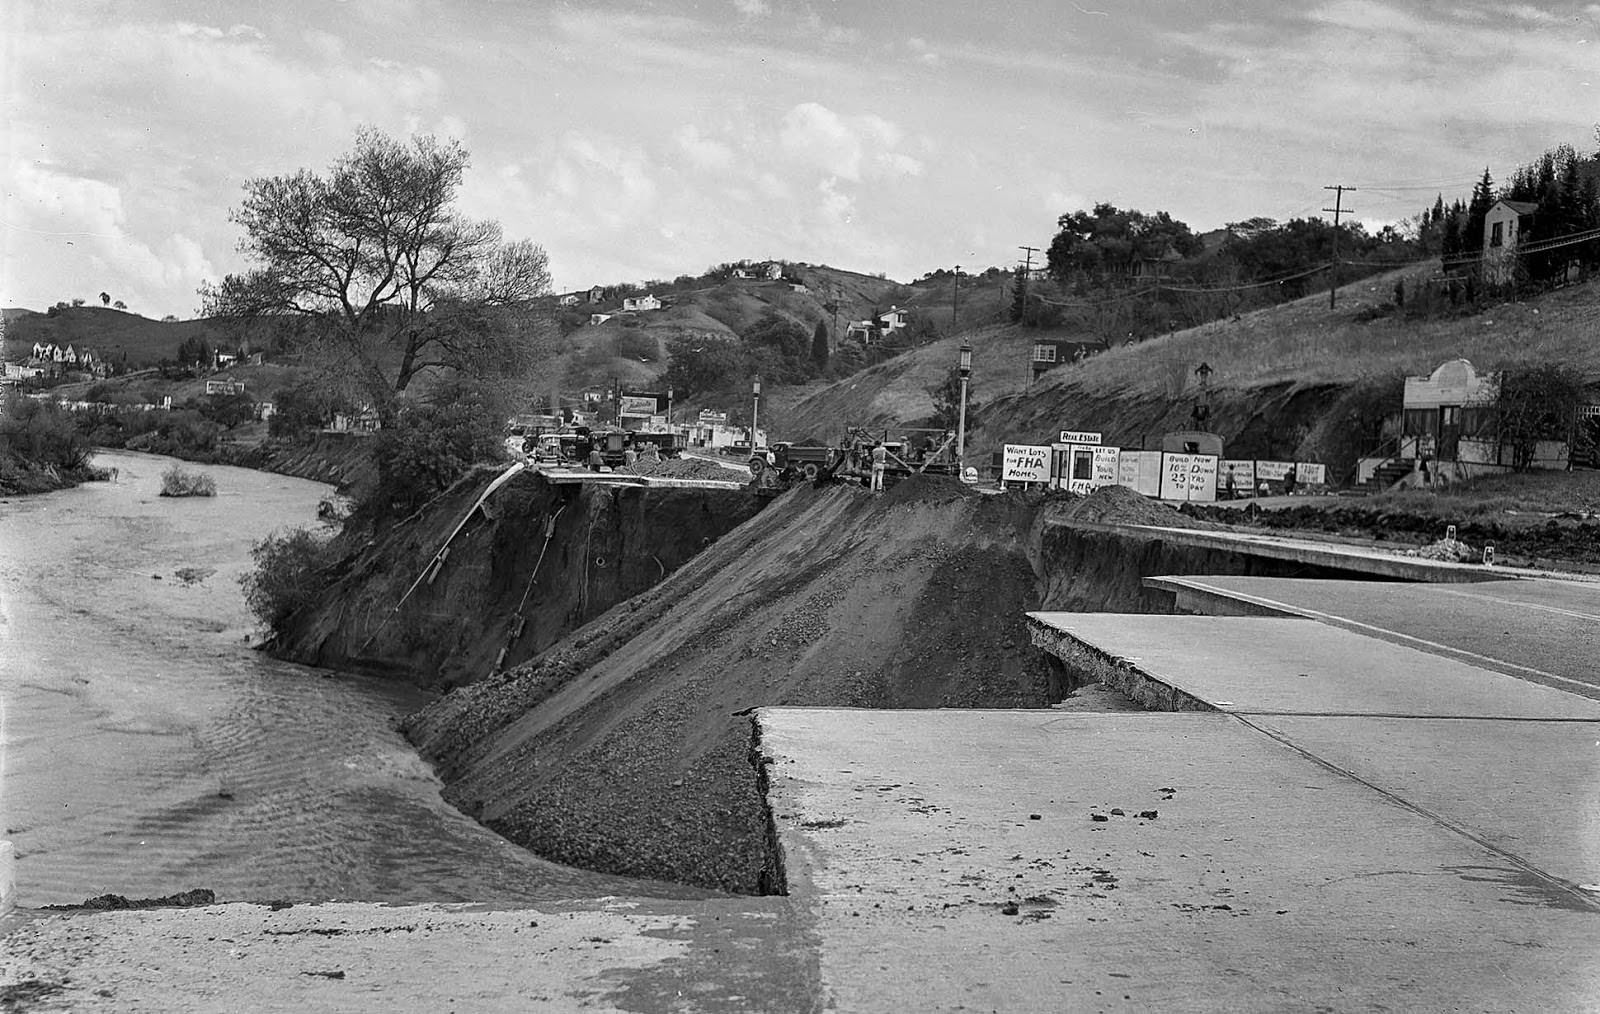 Los Angeles city engineering crews fill in a 300-yard section of Ventura Boulevard near Laurel Canyon Drive, 1938